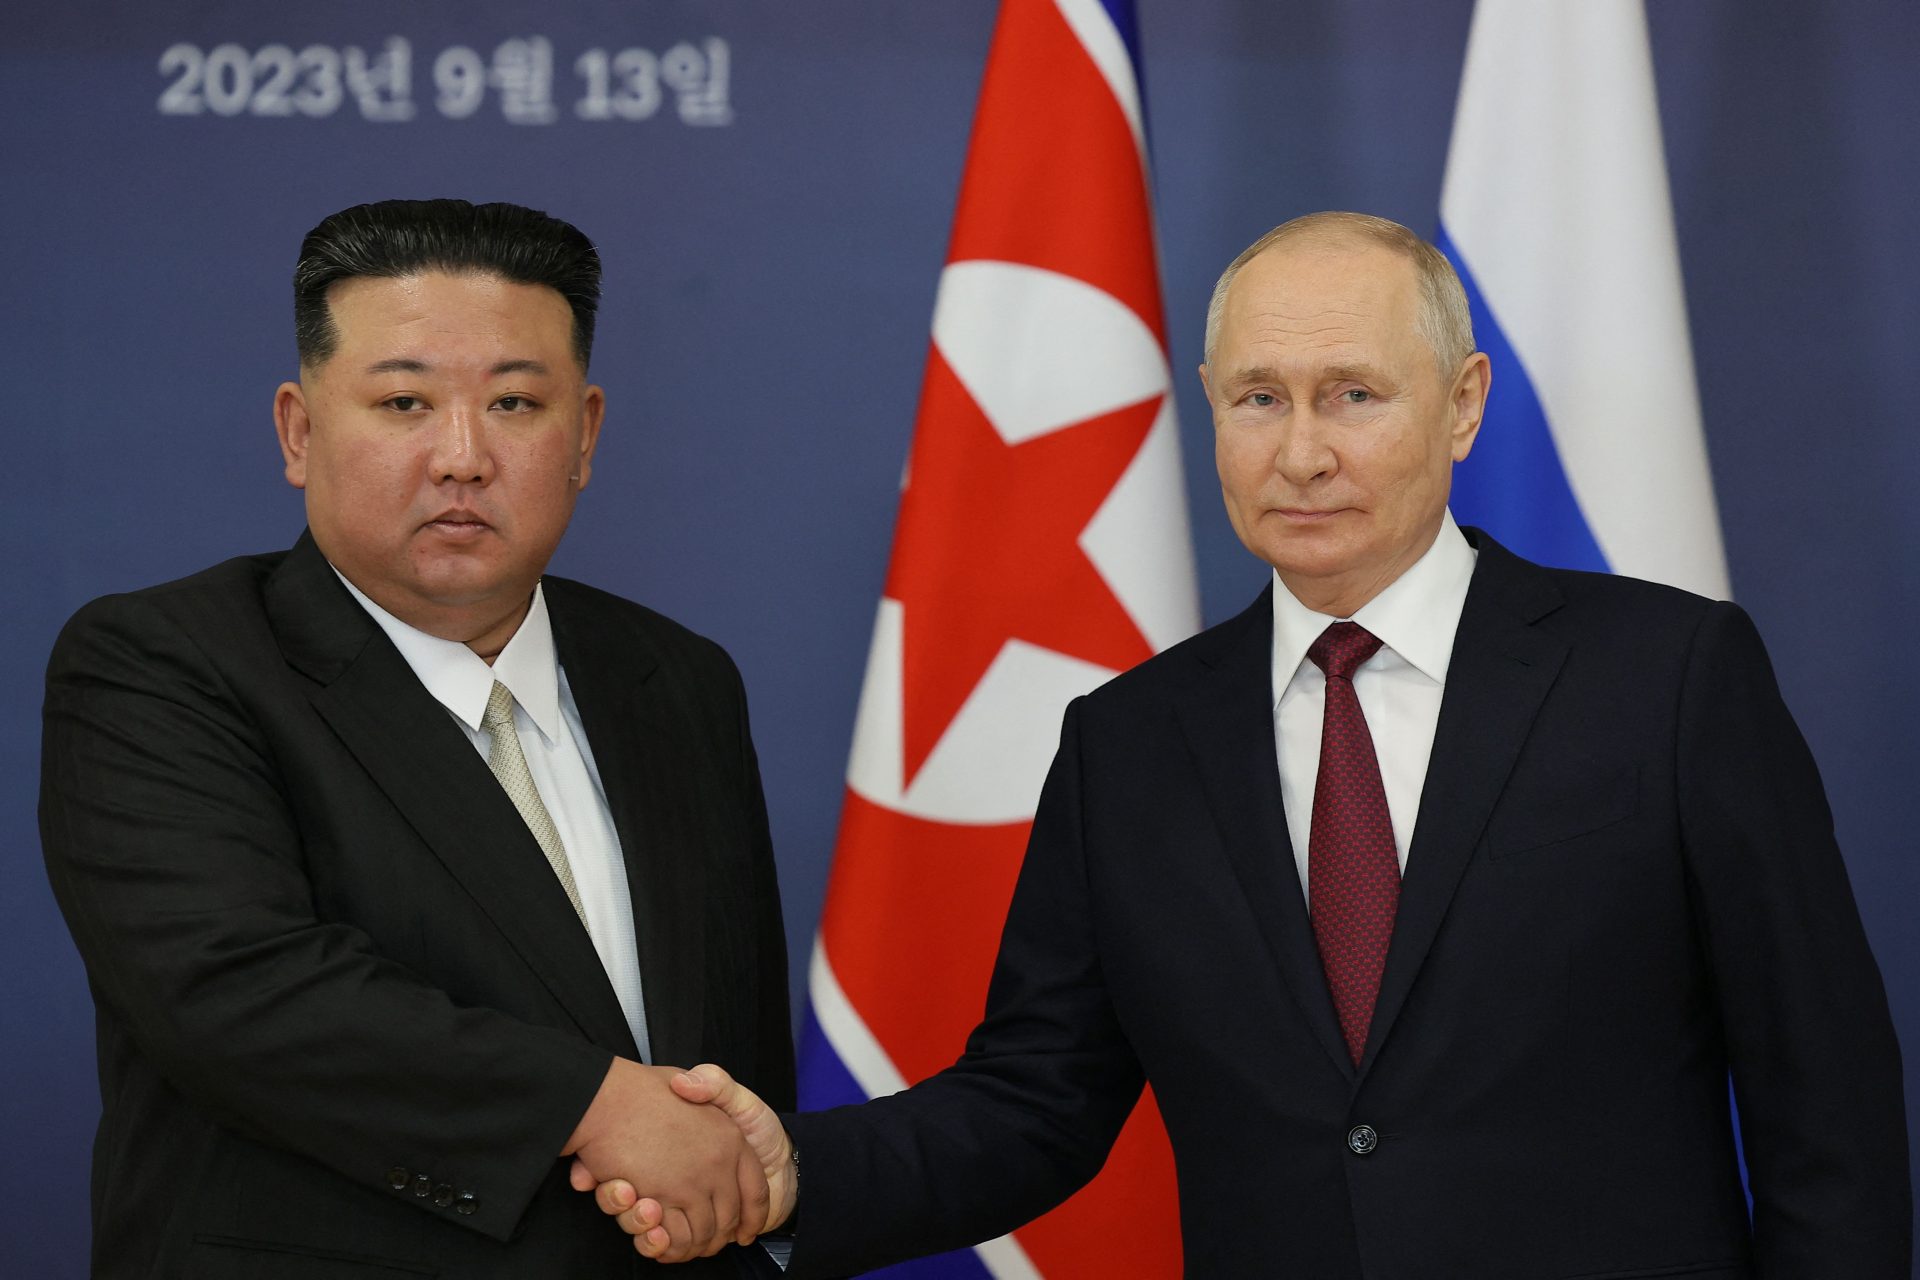 Russia has only gotten closer to North Korea